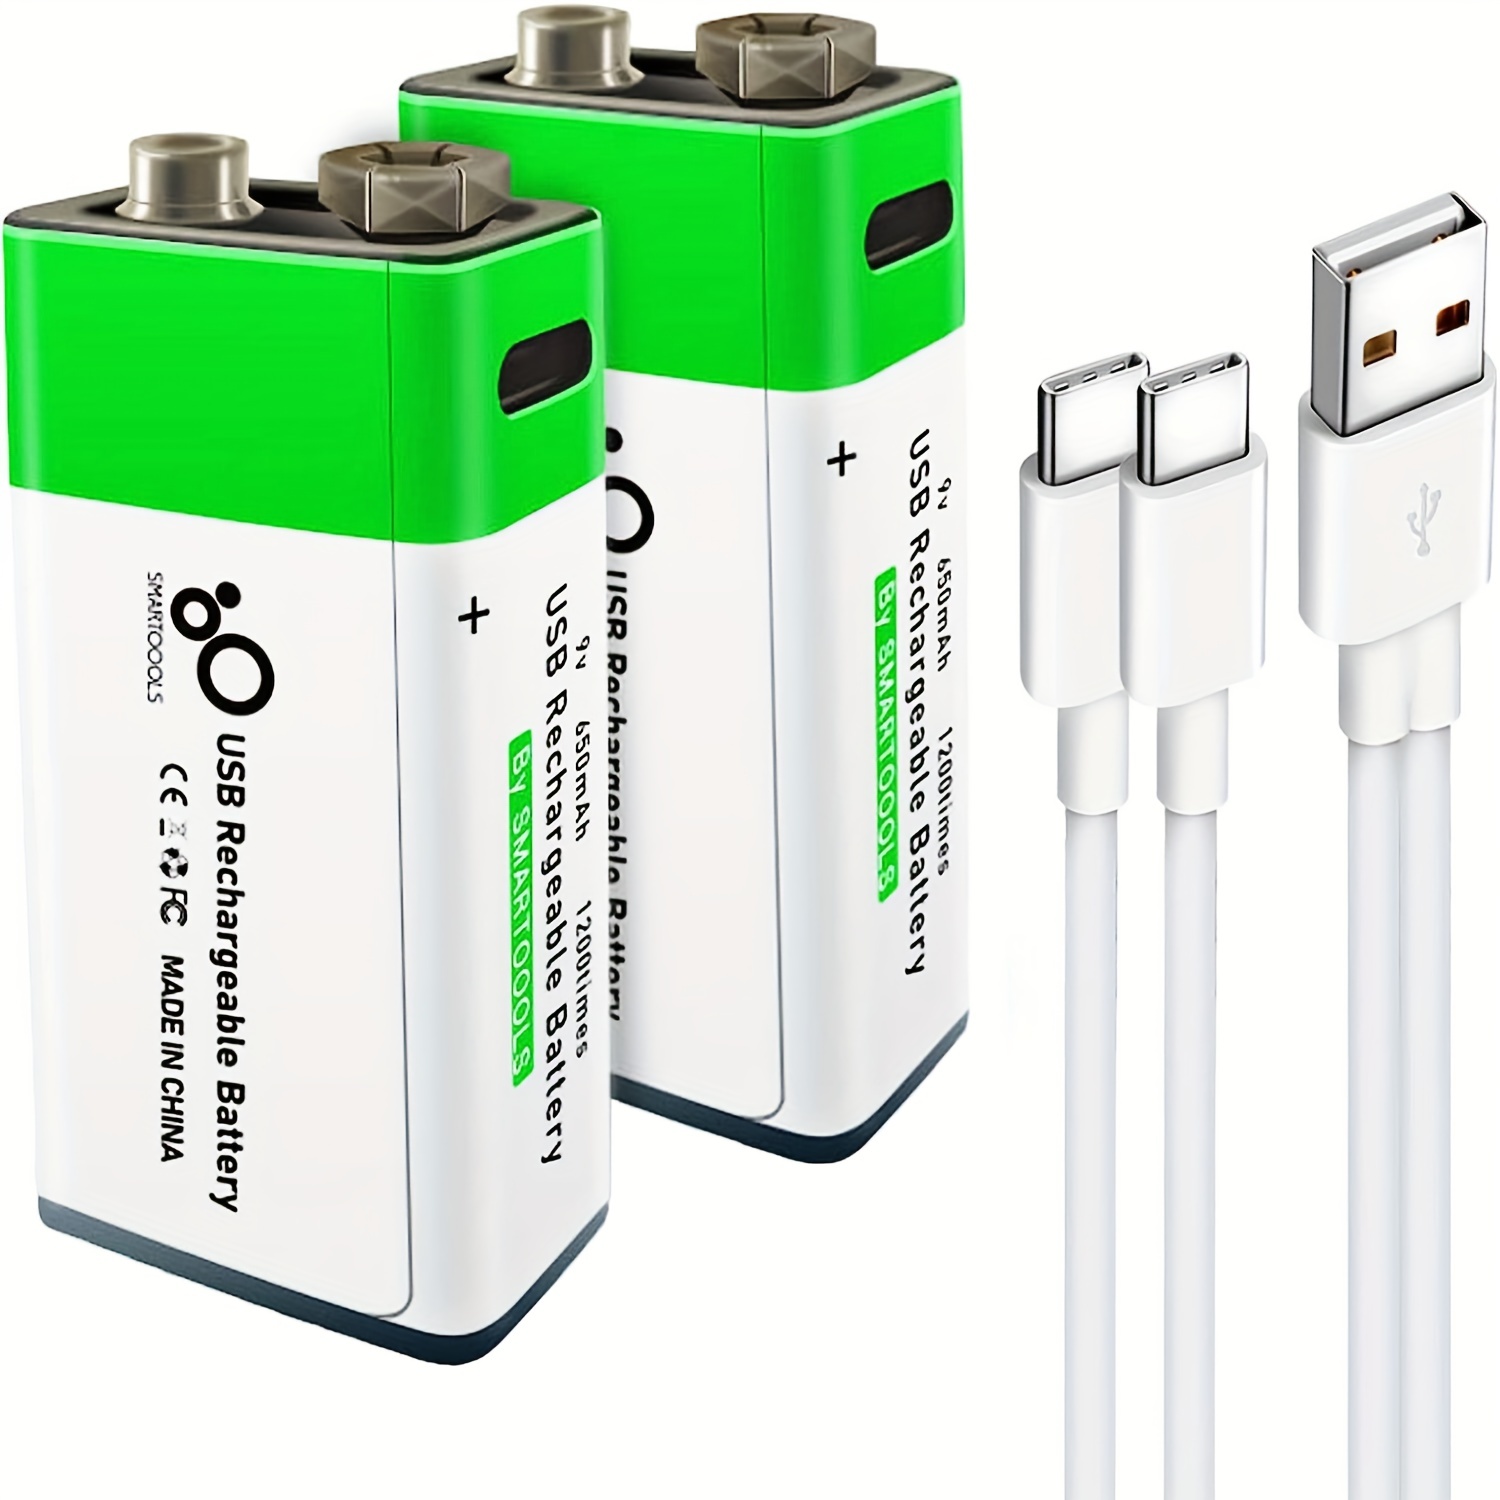 Pile rechargeable AA USB 1,5 V au lithium AAA - Chine Batterie, batterie  solaire